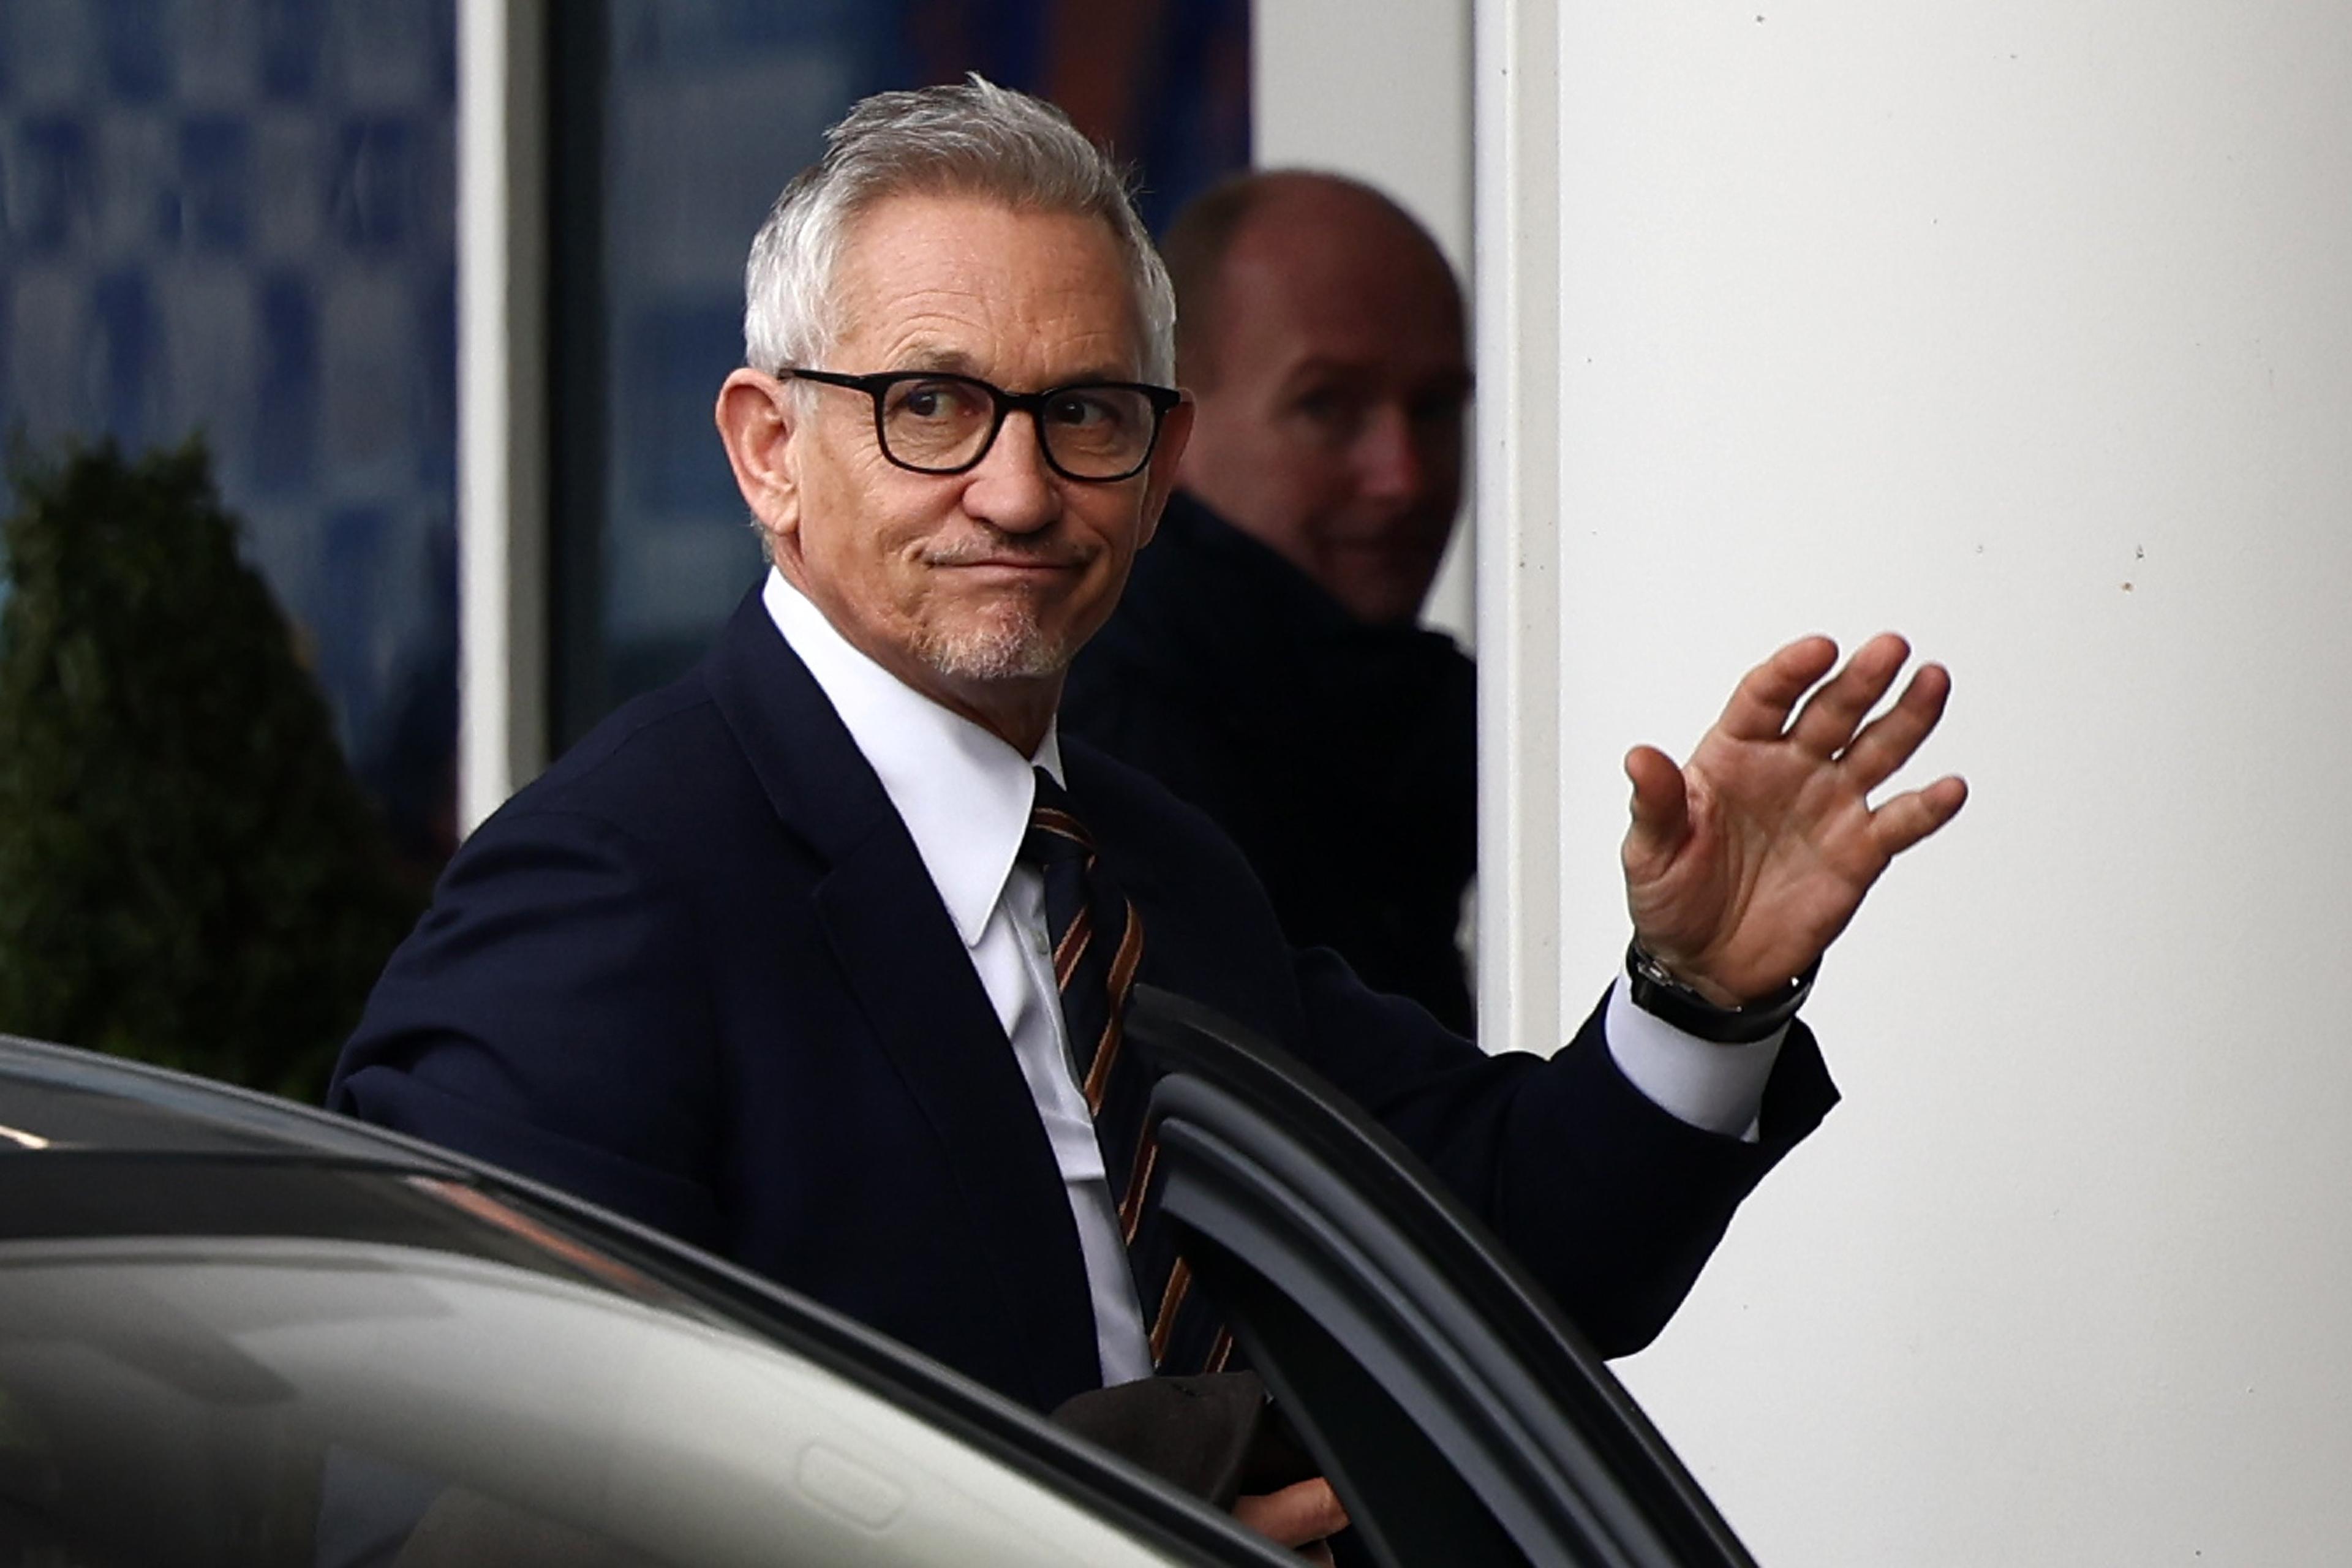 Gary Lineker, former England footballer turned sports TV presenter for the BBC, arrives at the King Power Stadium in Leicester, central England on March 11, 2023, ahead of the English Premier League football match between Leicester City and Chelsea. - The BBC's sport service was in meltdown on Saturday after pundits and commentators refused to work in support of presenter Gary Lineker, who was forced to "step back" after accusing the government of using Nazi-era rhetoric. Match of the Day presenter Lineker, England's fourth most prolific goalscorer, sparked an impartiality row by criticising the British government's new policy on tackling illegal immigration. (Photo by Darren Staples / AFP)